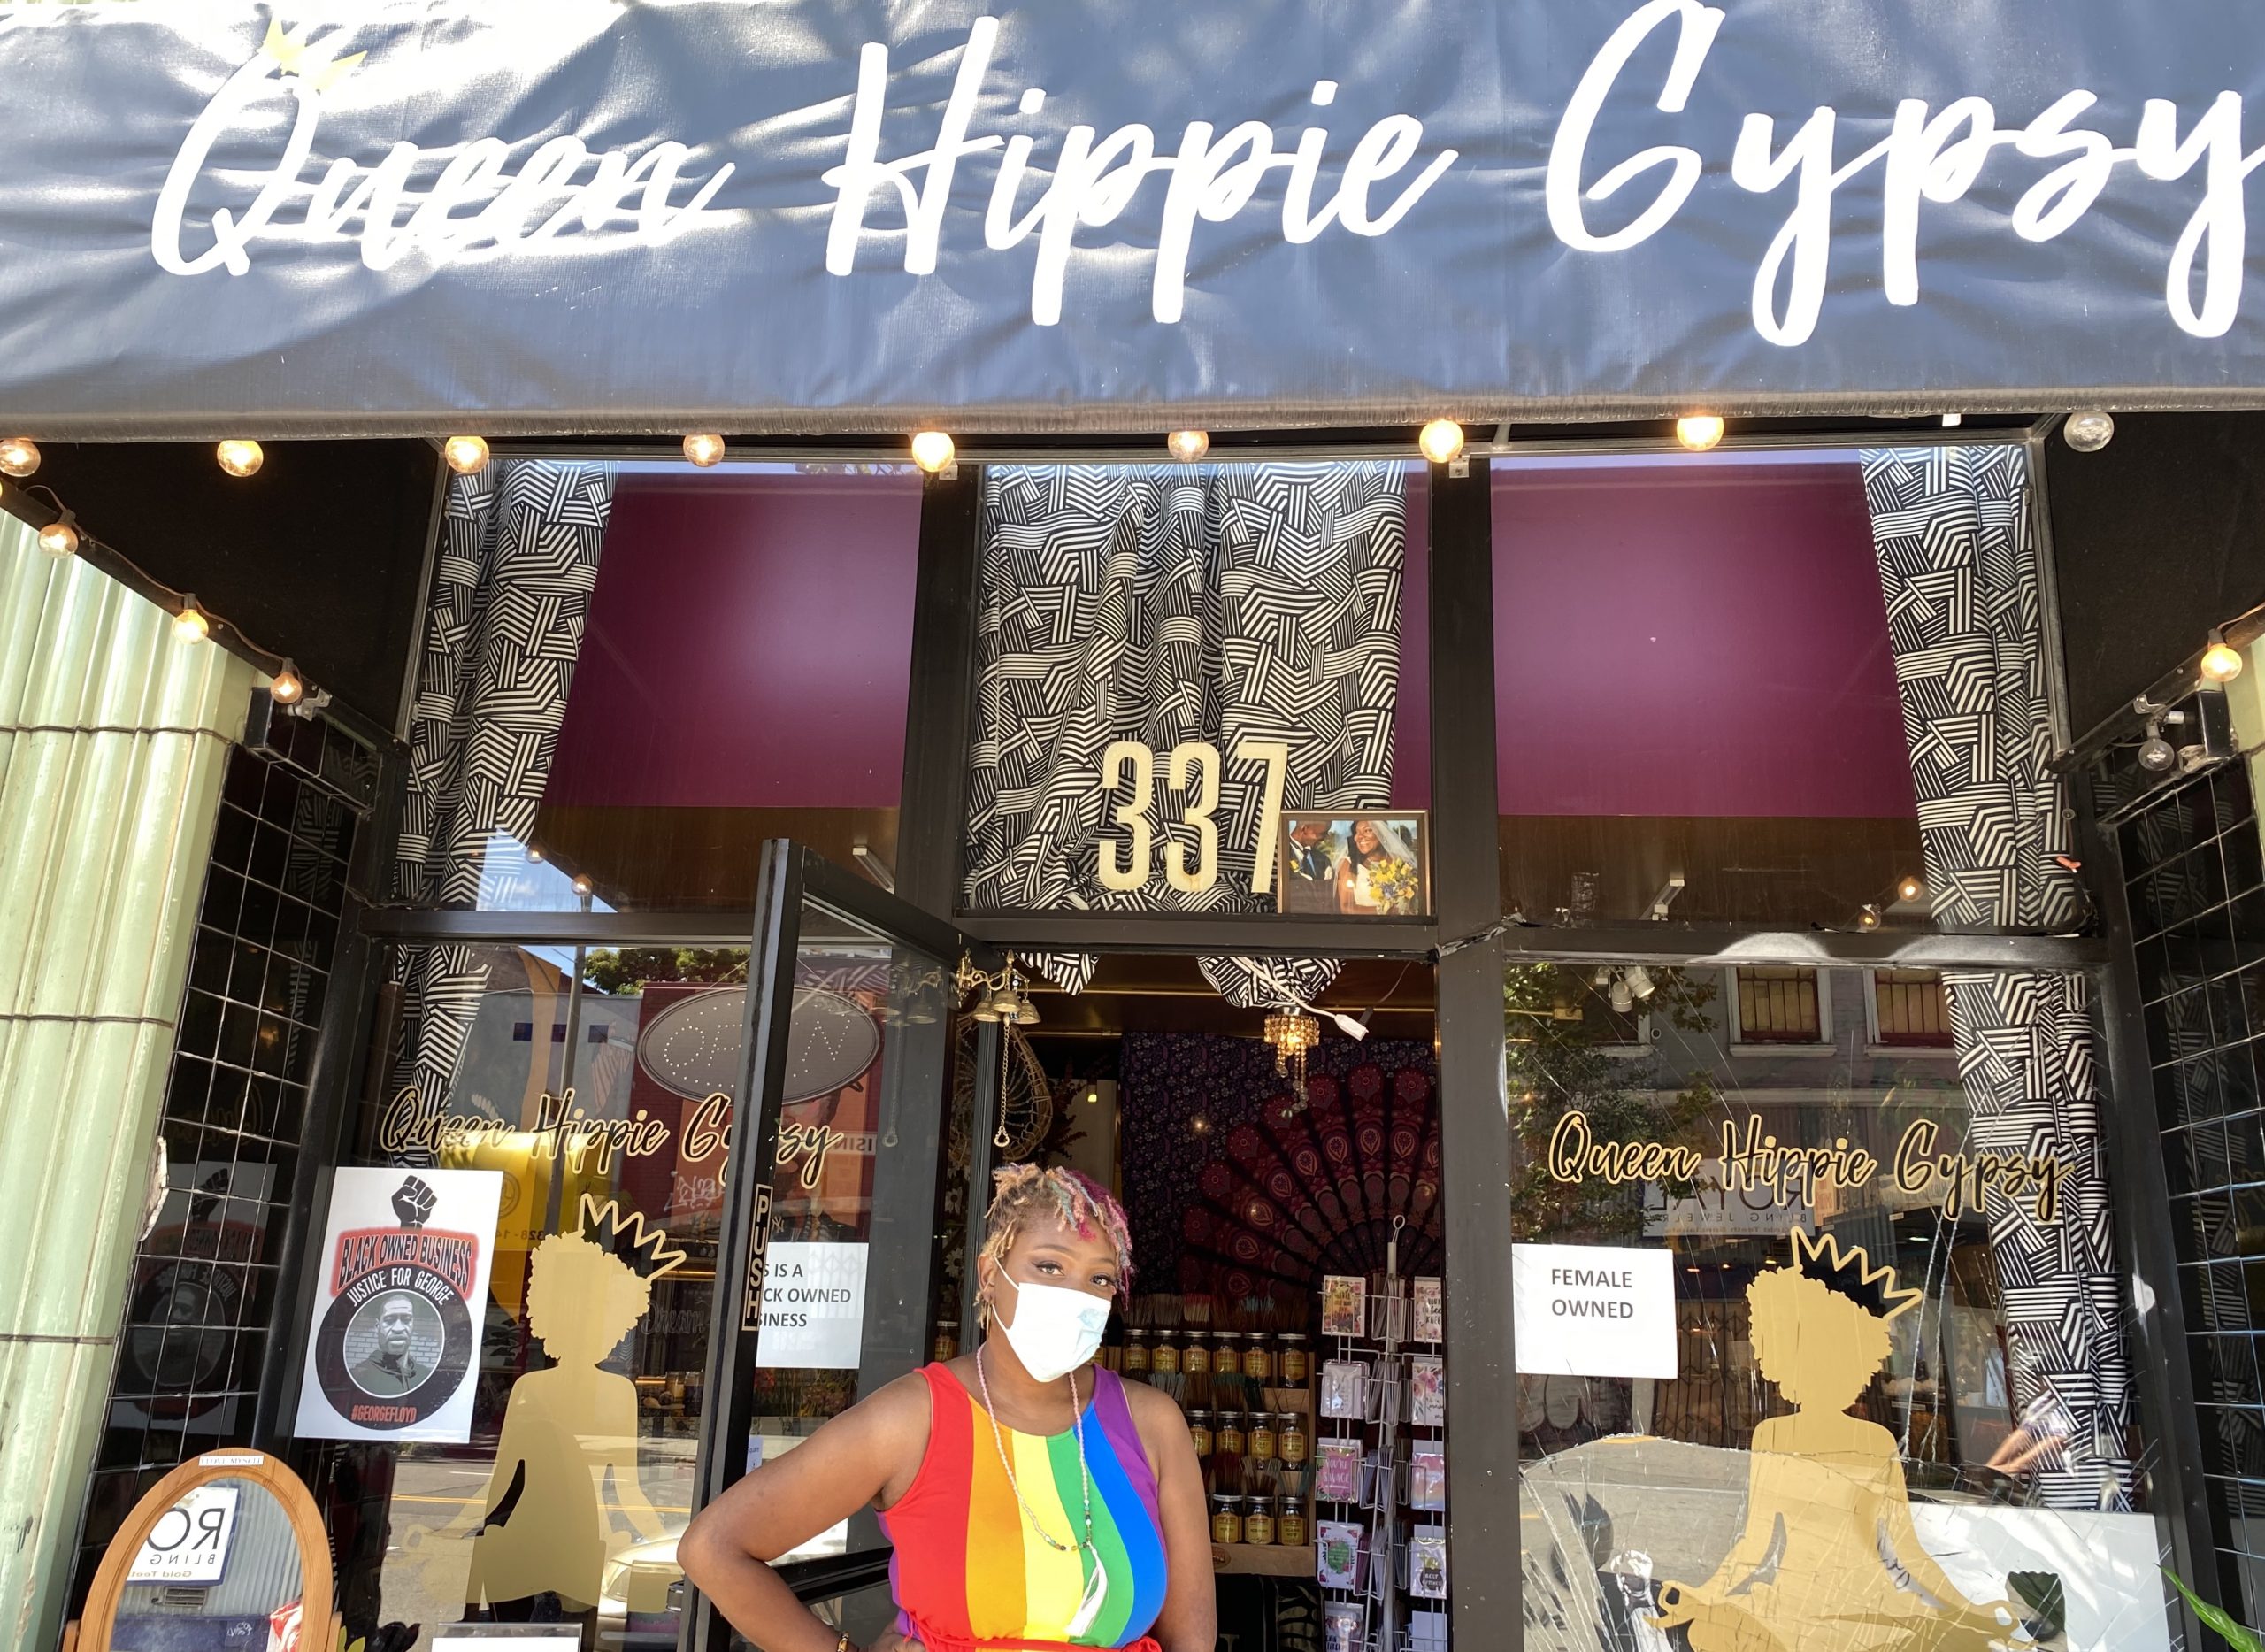 An African American woman wearing a rainbow colored dress stands in front of a storefront in Oakland.